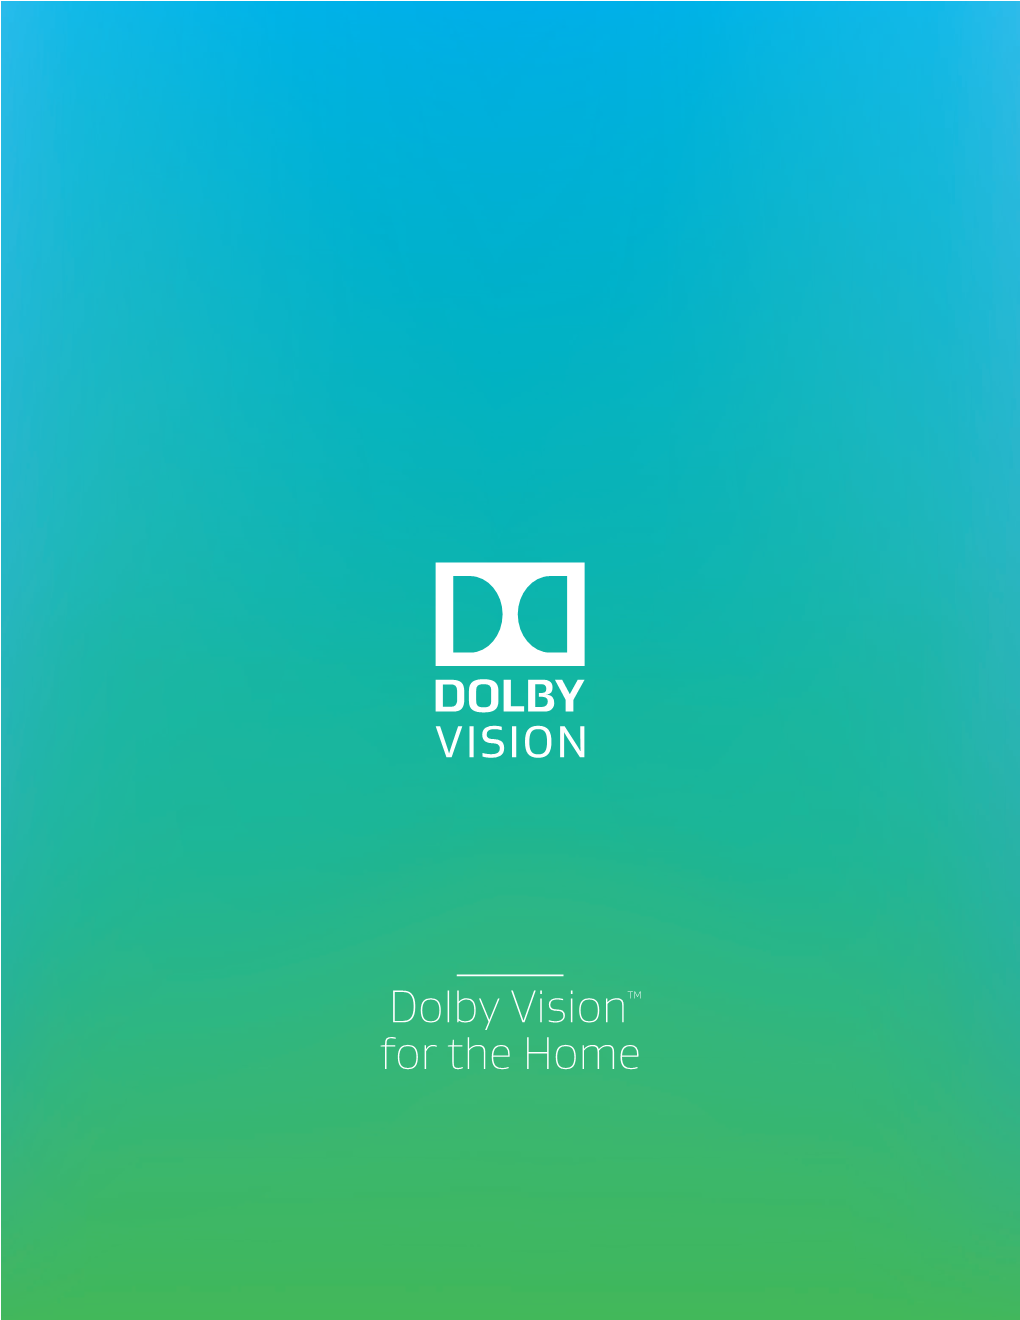 What Is Dolby Vision?